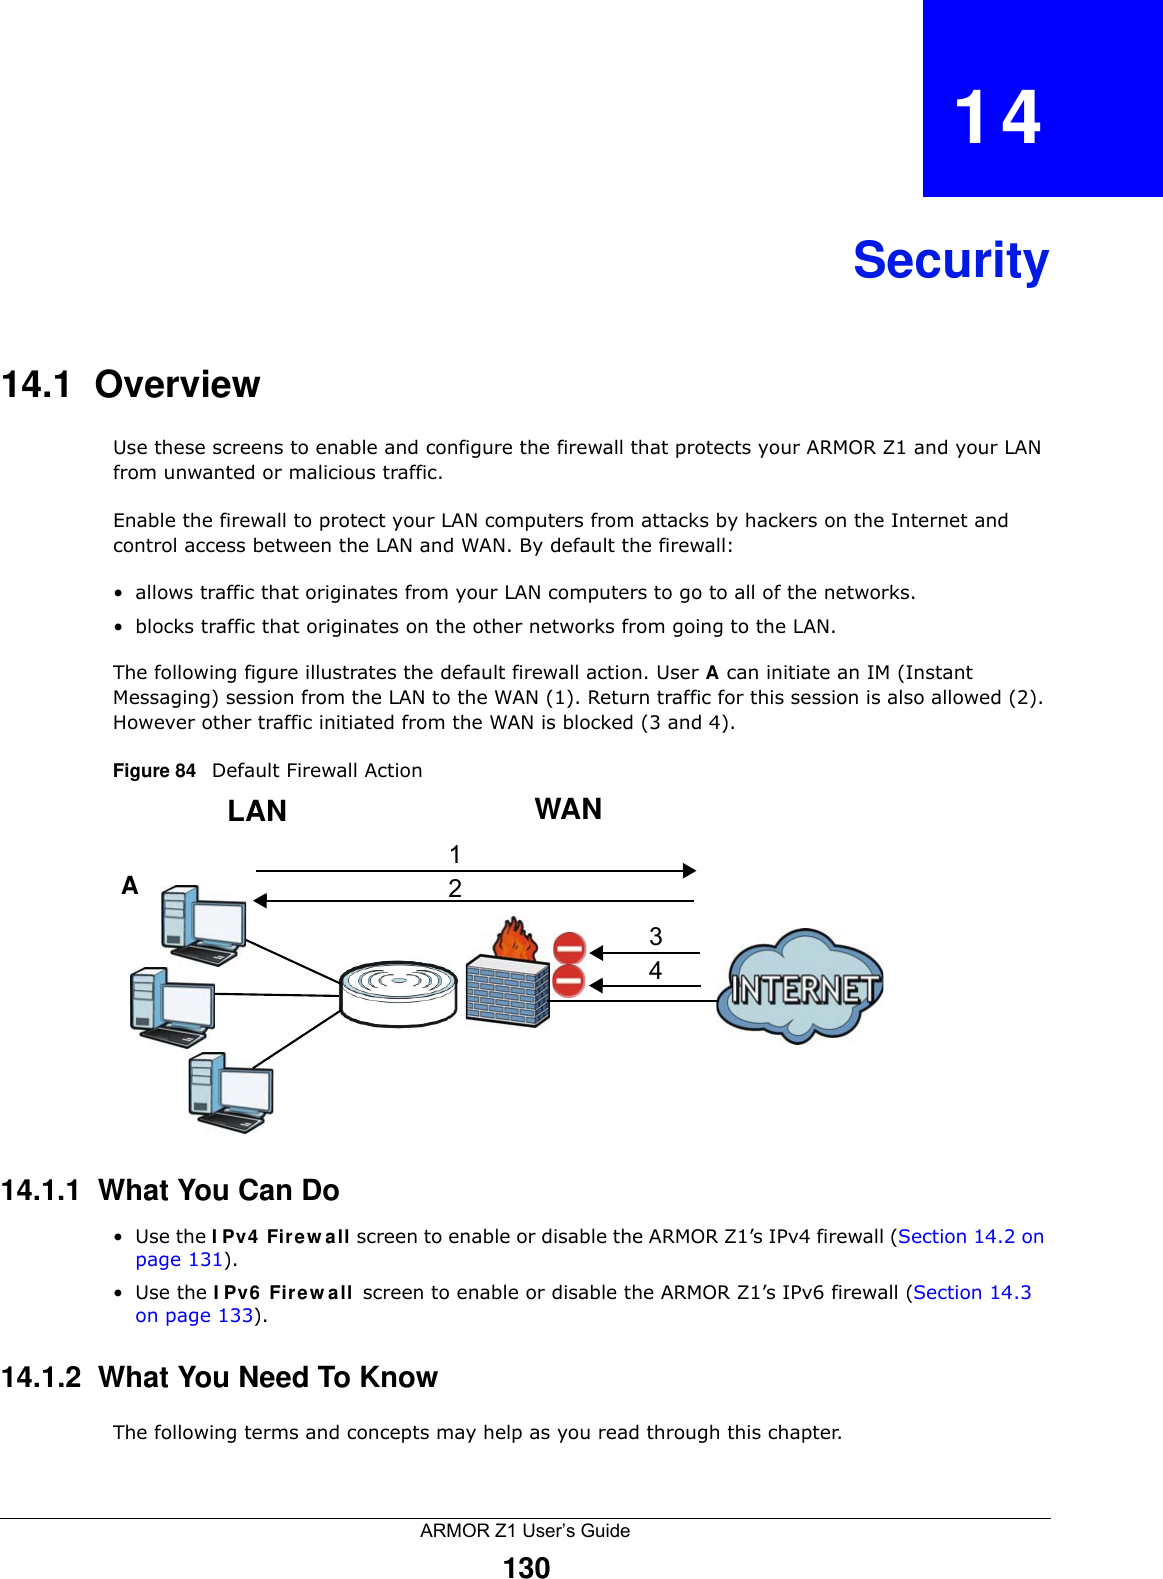 ARMOR Z1 User’s Guide130CHAPTER   14Security14.1  Overview   Use these screens to enable and configure the firewall that protects your ARMOR Z1 and your LAN from unwanted or malicious traffic.Enable the firewall to protect your LAN computers from attacks by hackers on the Internet and control access between the LAN and WAN. By default the firewall:• allows traffic that originates from your LAN computers to go to all of the networks. • blocks traffic that originates on the other networks from going to the LAN. The following figure illustrates the default firewall action. User A can initiate an IM (Instant Messaging) session from the LAN to the WAN (1). Return traffic for this session is also allowed (2). However other traffic initiated from the WAN is blocked (3 and 4).Figure 84   Default Firewall Action14.1.1  What You Can Do•Use the IPv4 Firewall screen to enable or disable the ARMOR Z1’s IPv4 firewall (Section 14.2 on page 131).•Use the IPv6 Firewall screen to enable or disable the ARMOR Z1’s IPv6 firewall (Section 14.3 on page 133).14.1.2  What You Need To KnowThe following terms and concepts may help as you read through this chapter.WANLAN3412A